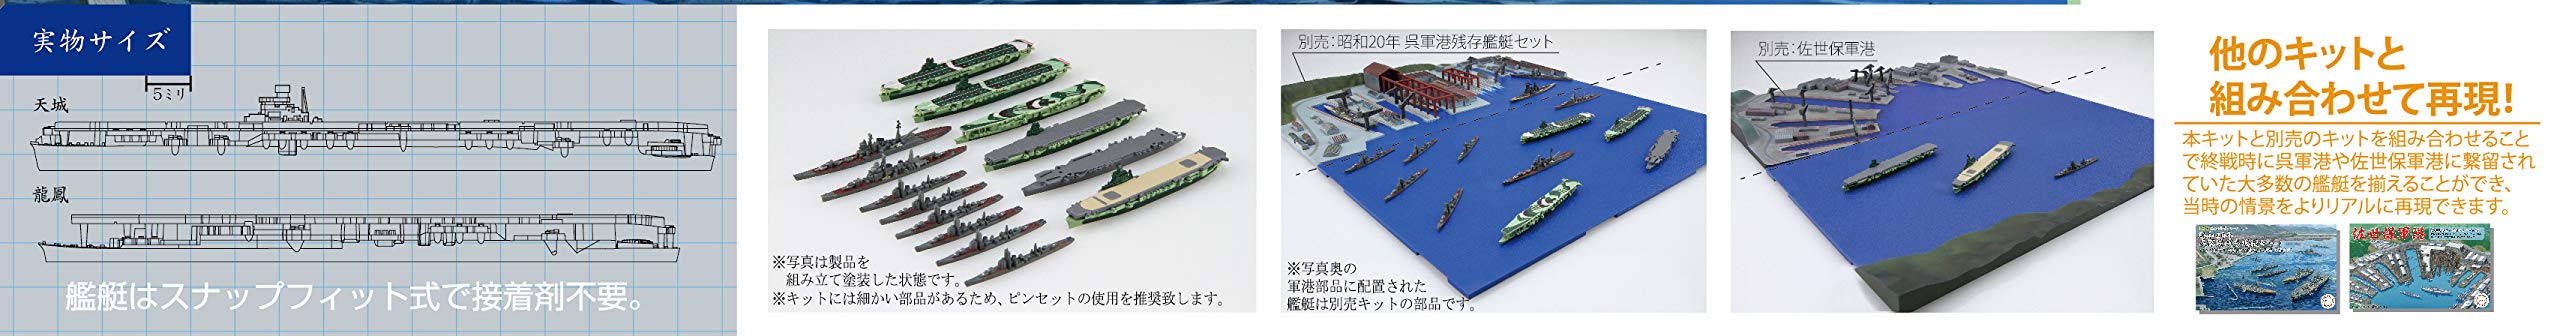 Fujimi Model 1/3000 Collectable Warship Series No.19 Survival Ship Set At The End Of The War (Unryu Type/Ryuho Type/Hitaka Type/Aoba) Plastic Model Warship 19